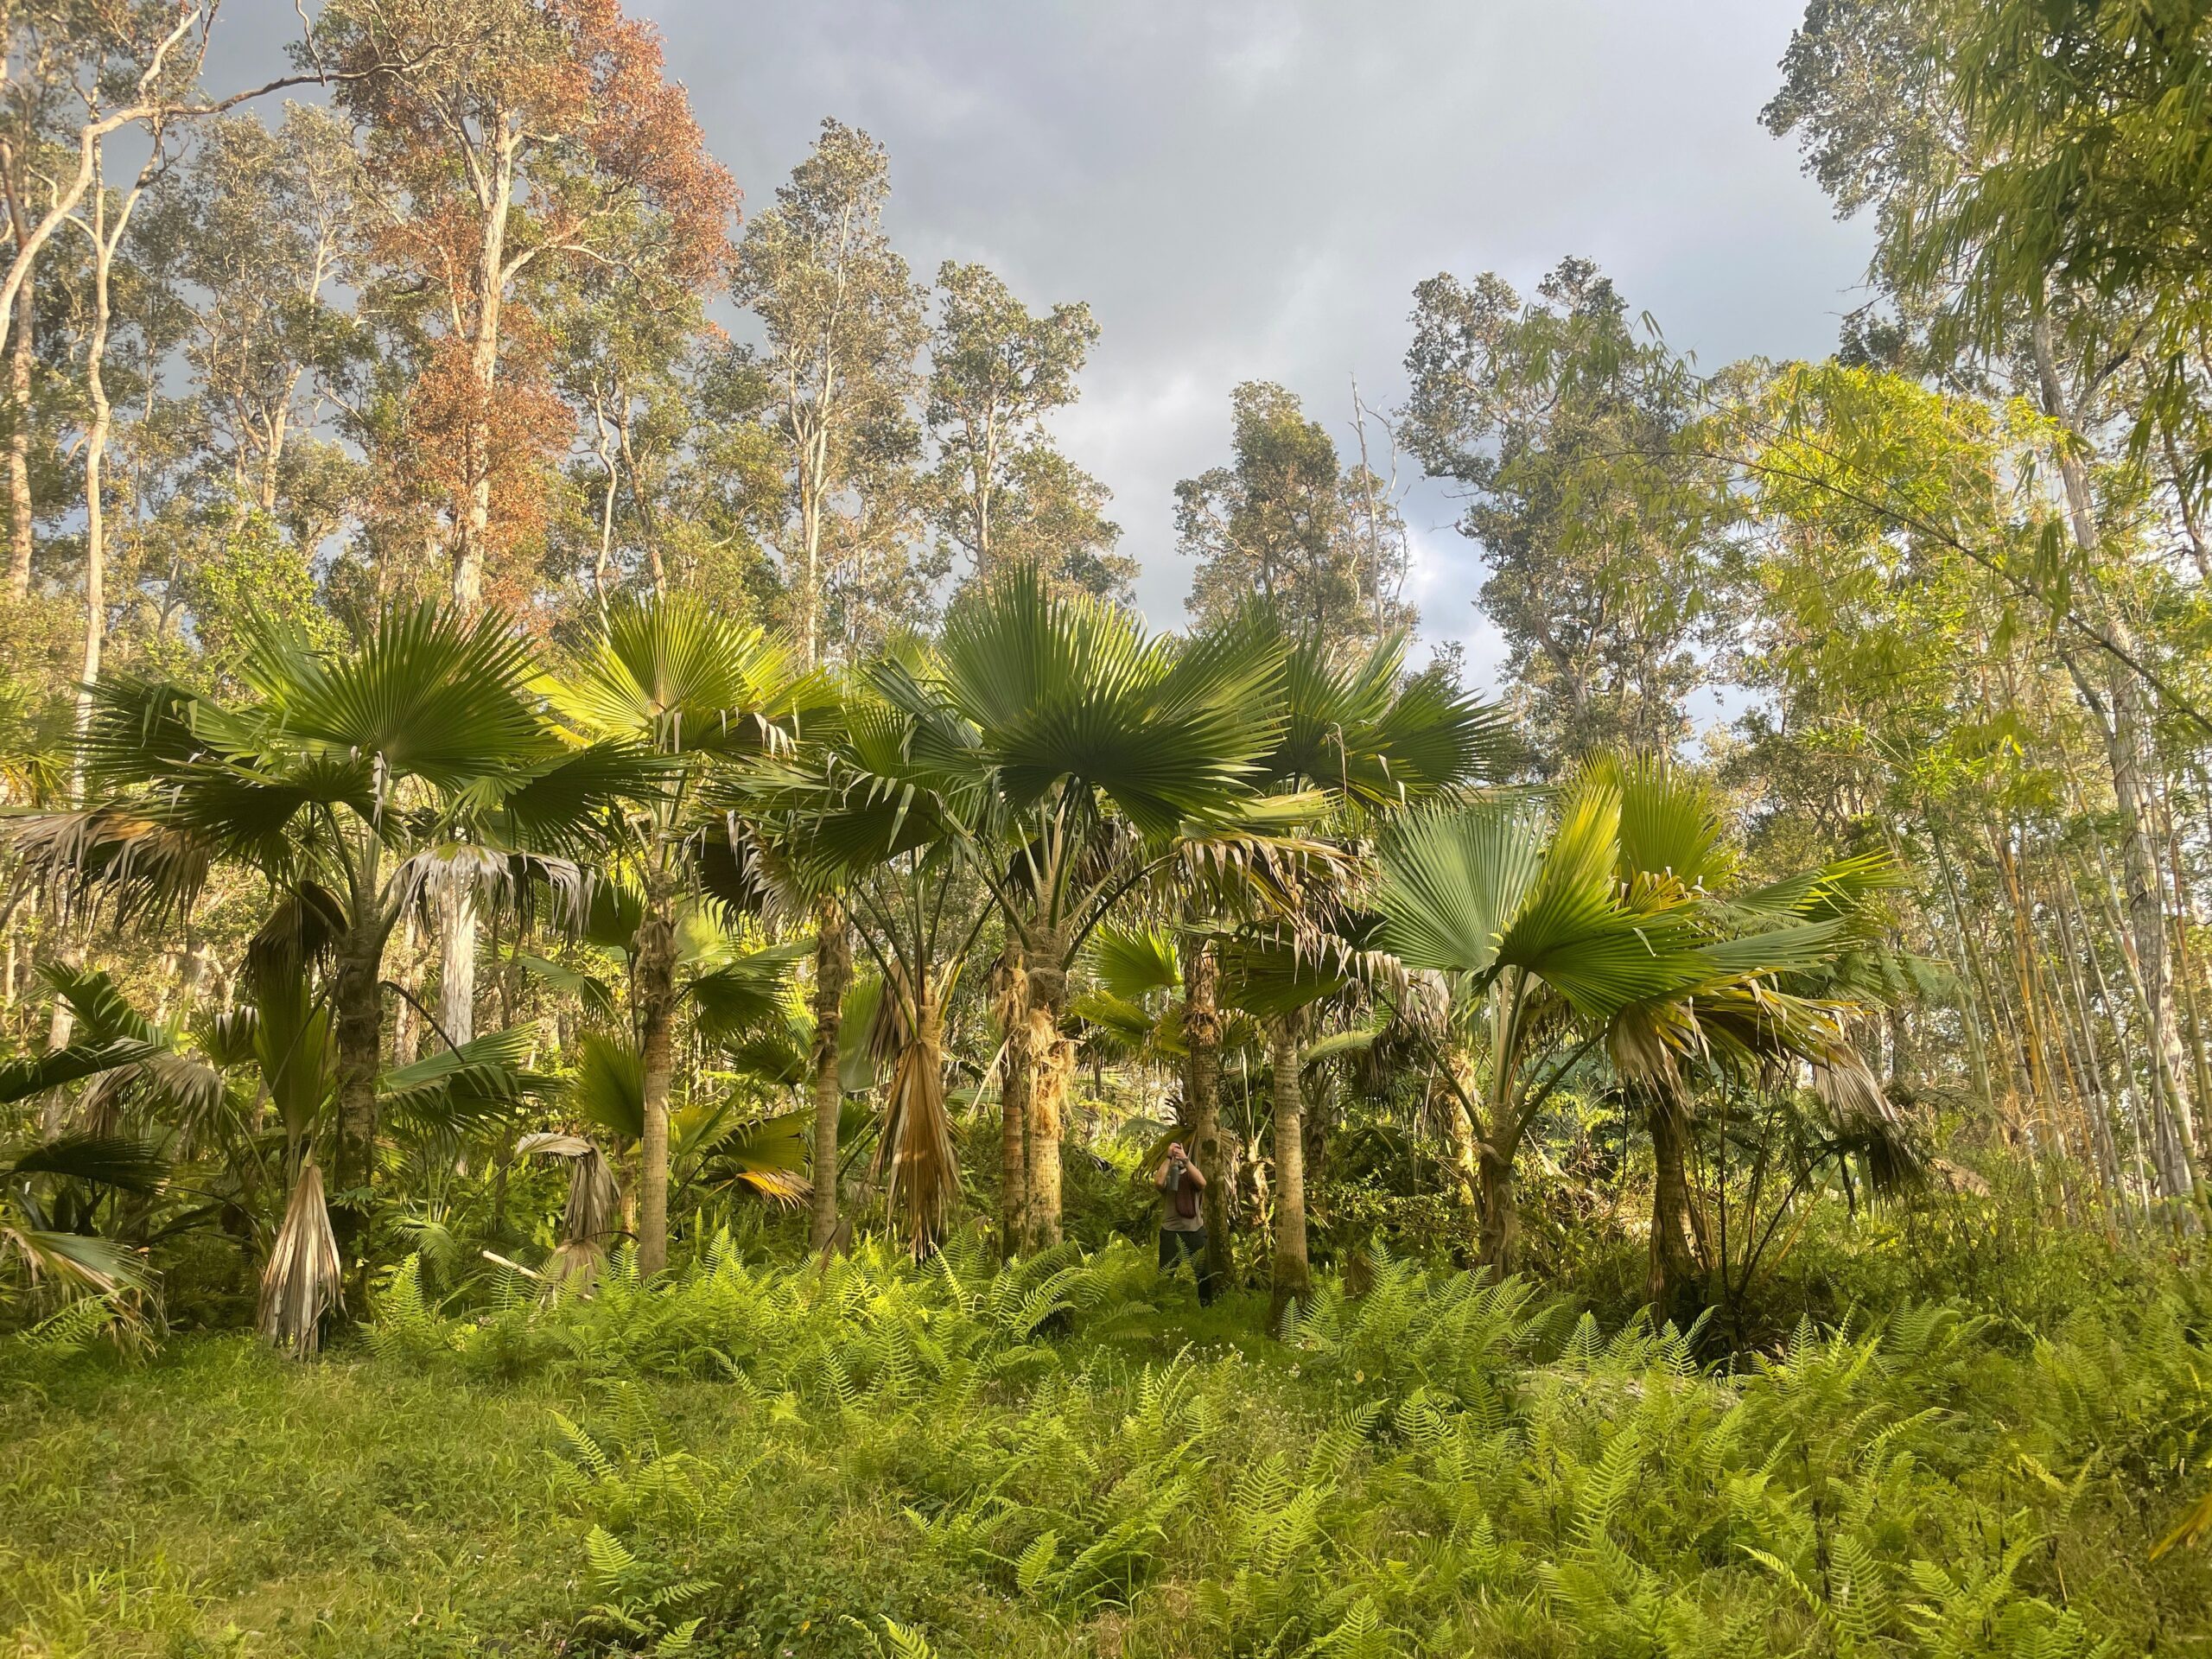 A group of young palm trees in a cloud forest